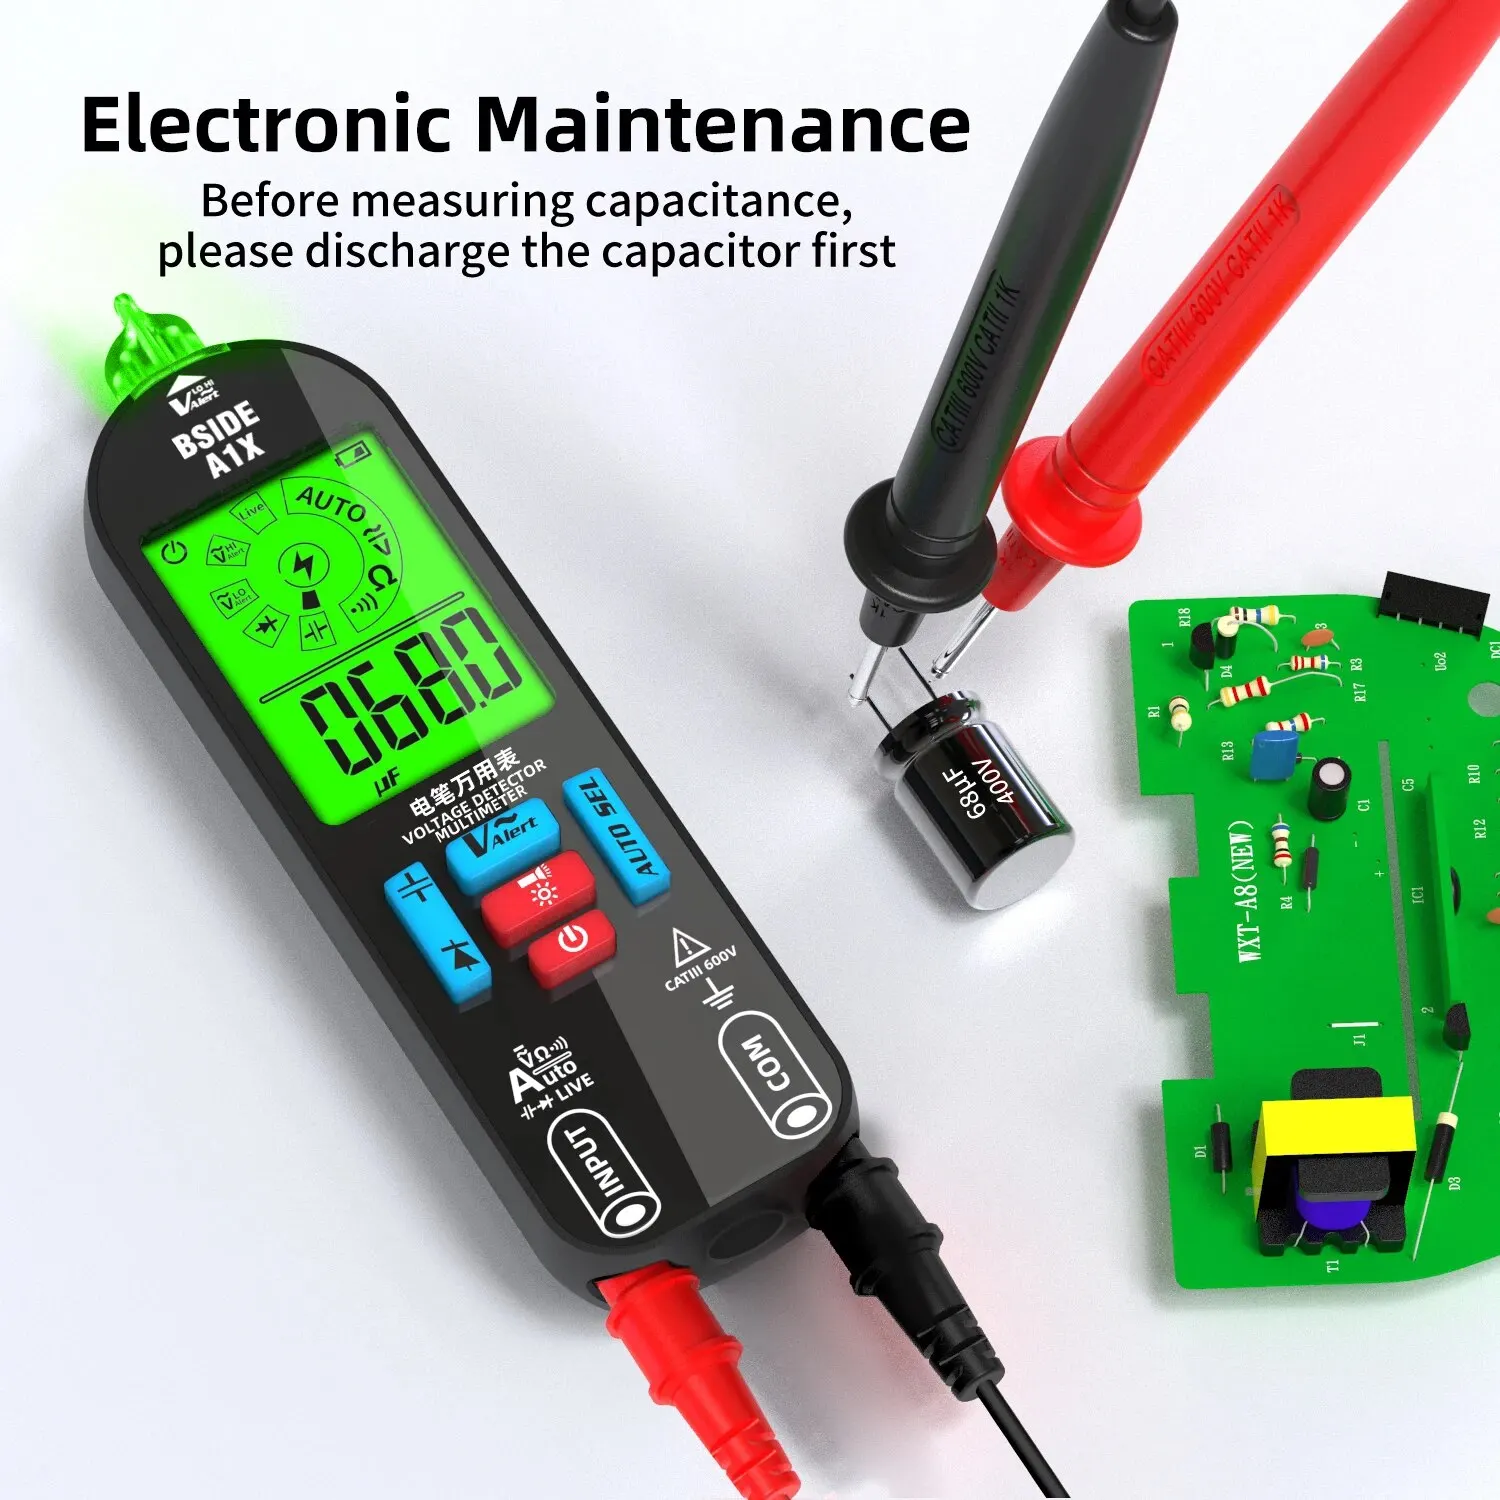 BSIDE A1X Digital Multimeter Voltage Resistance Diode Tester Electric Test Pen Auto Power Off with Power Recognition Meter